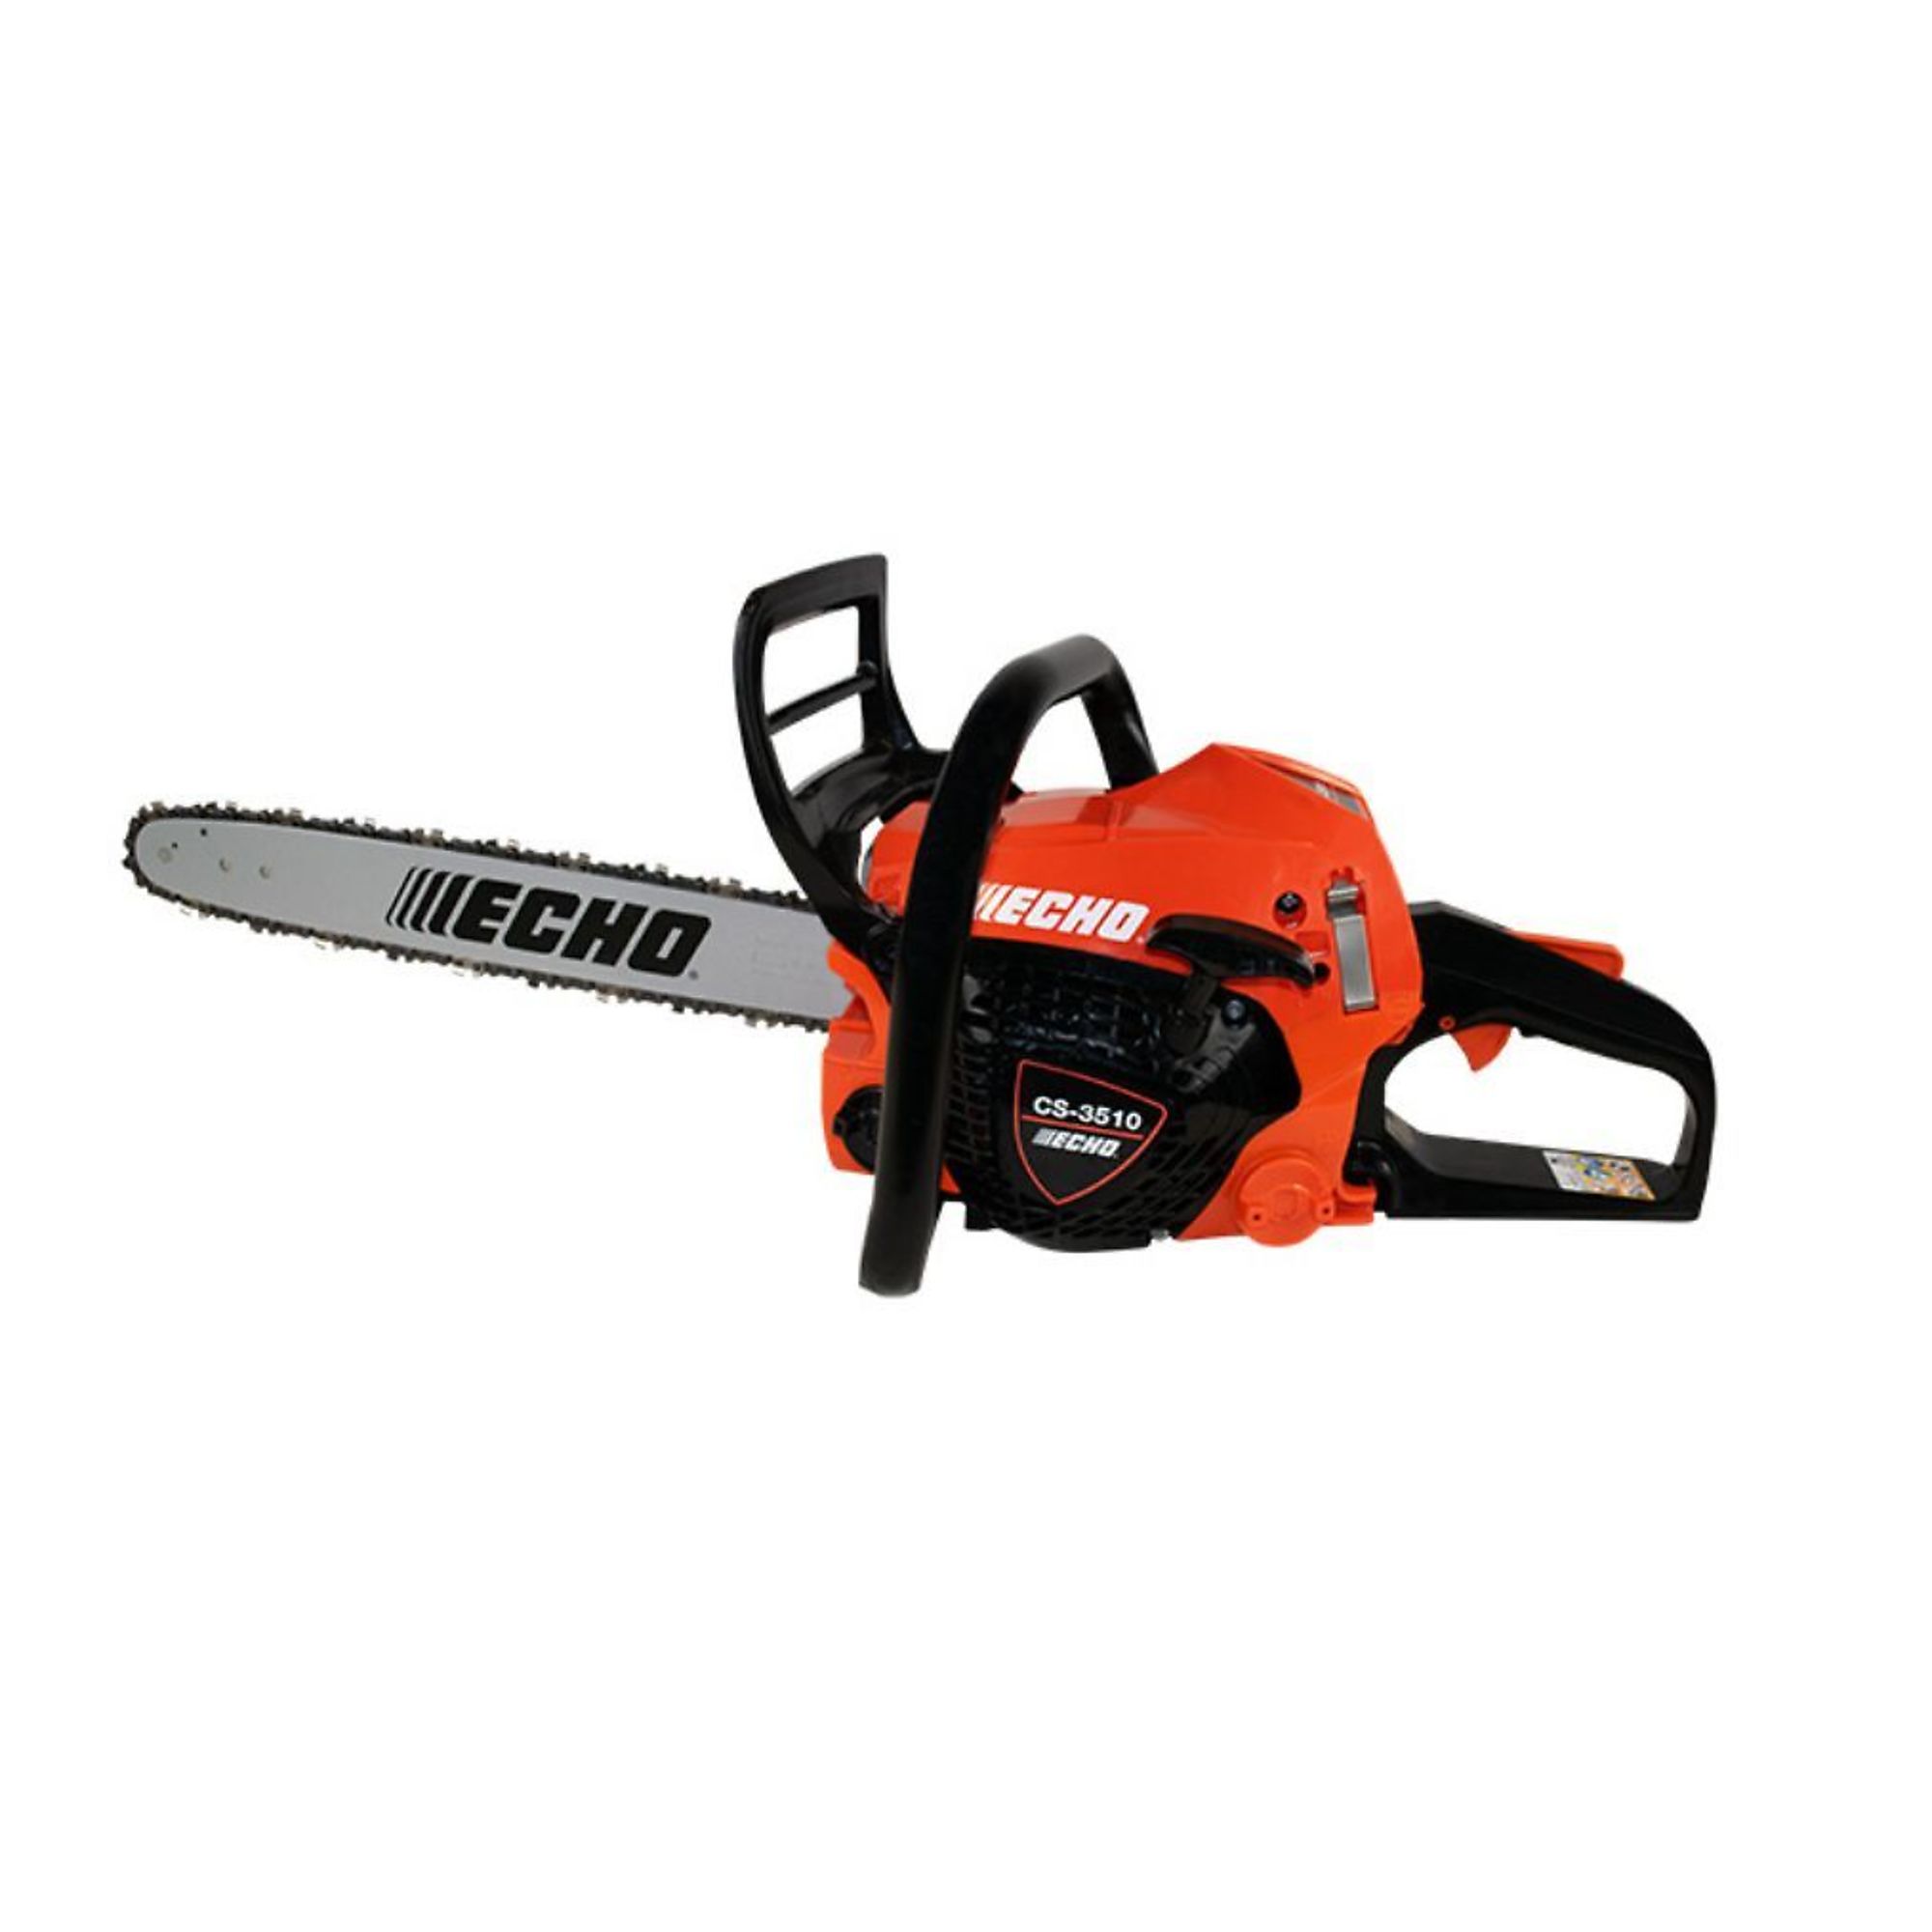 ECHO, Gas-Powered Rear Handle Chainsaw, Bar Length 16 in, Engine Displacement 34.4 cc, Model CS-3510-16